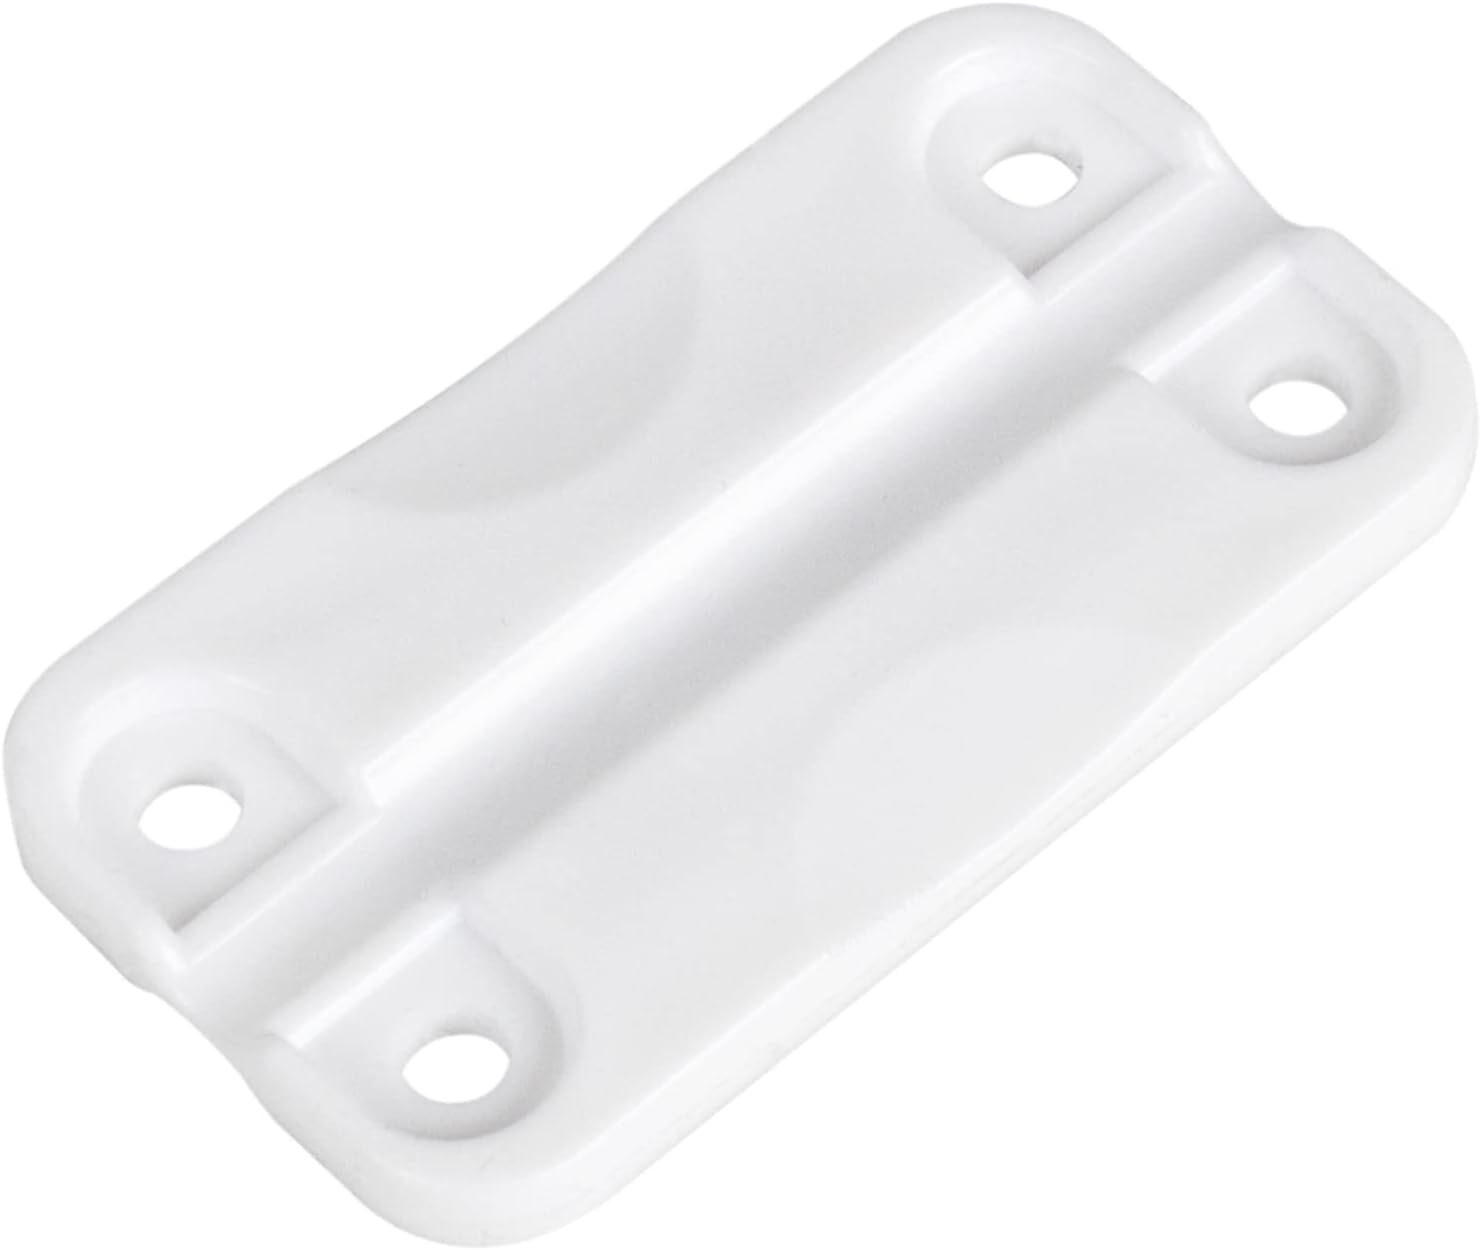 Set of 3 IGLOO PRODUCTS CORP Igloo Cooler Plastic Hinges for Ice Chests